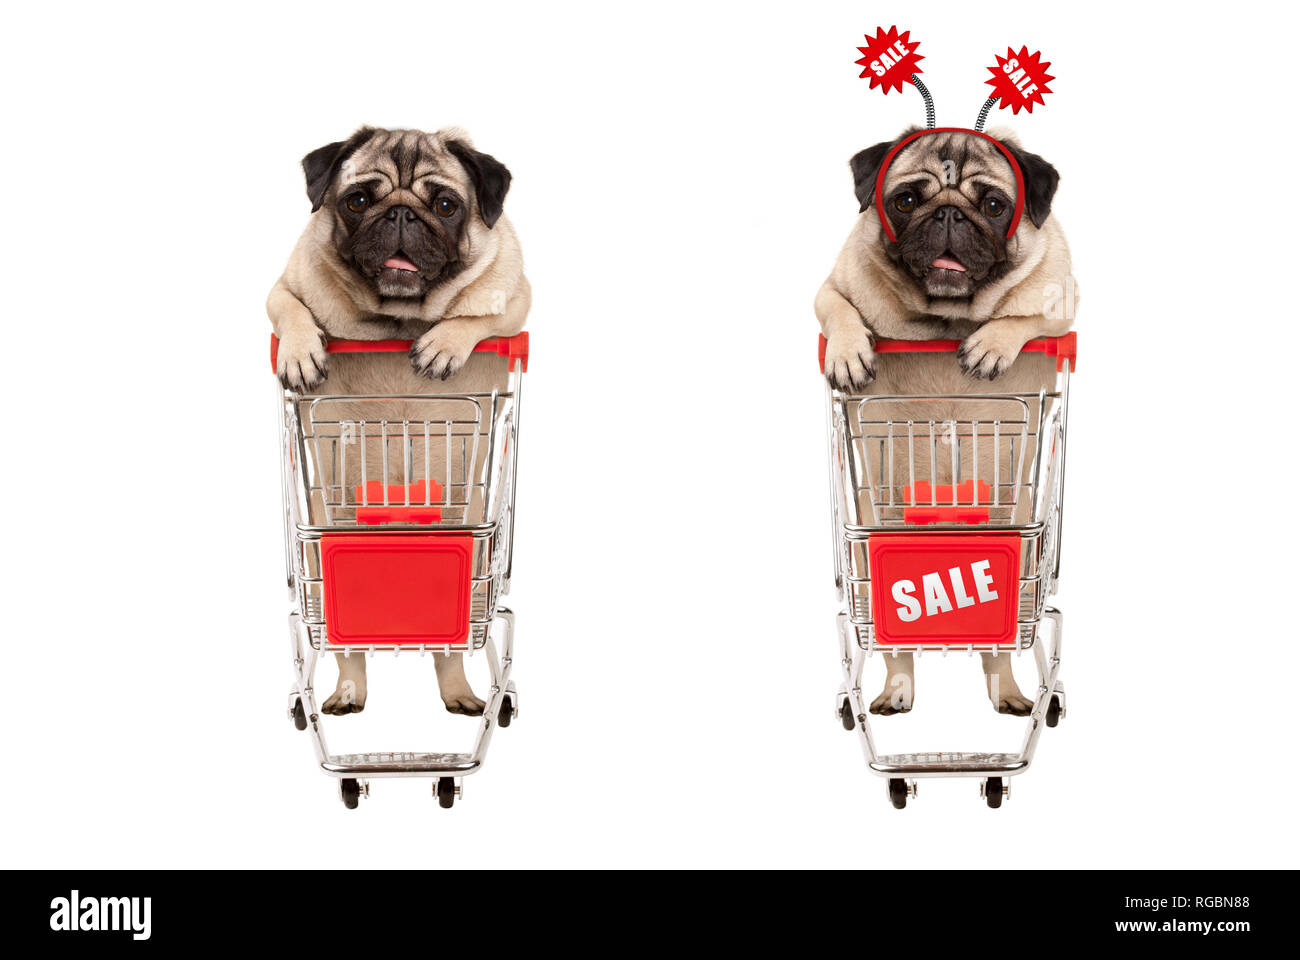 funny smiling shopping pug puppy dog standing behind red wired metal shopping cart with sale sign,  isolated on white background Stock Photo